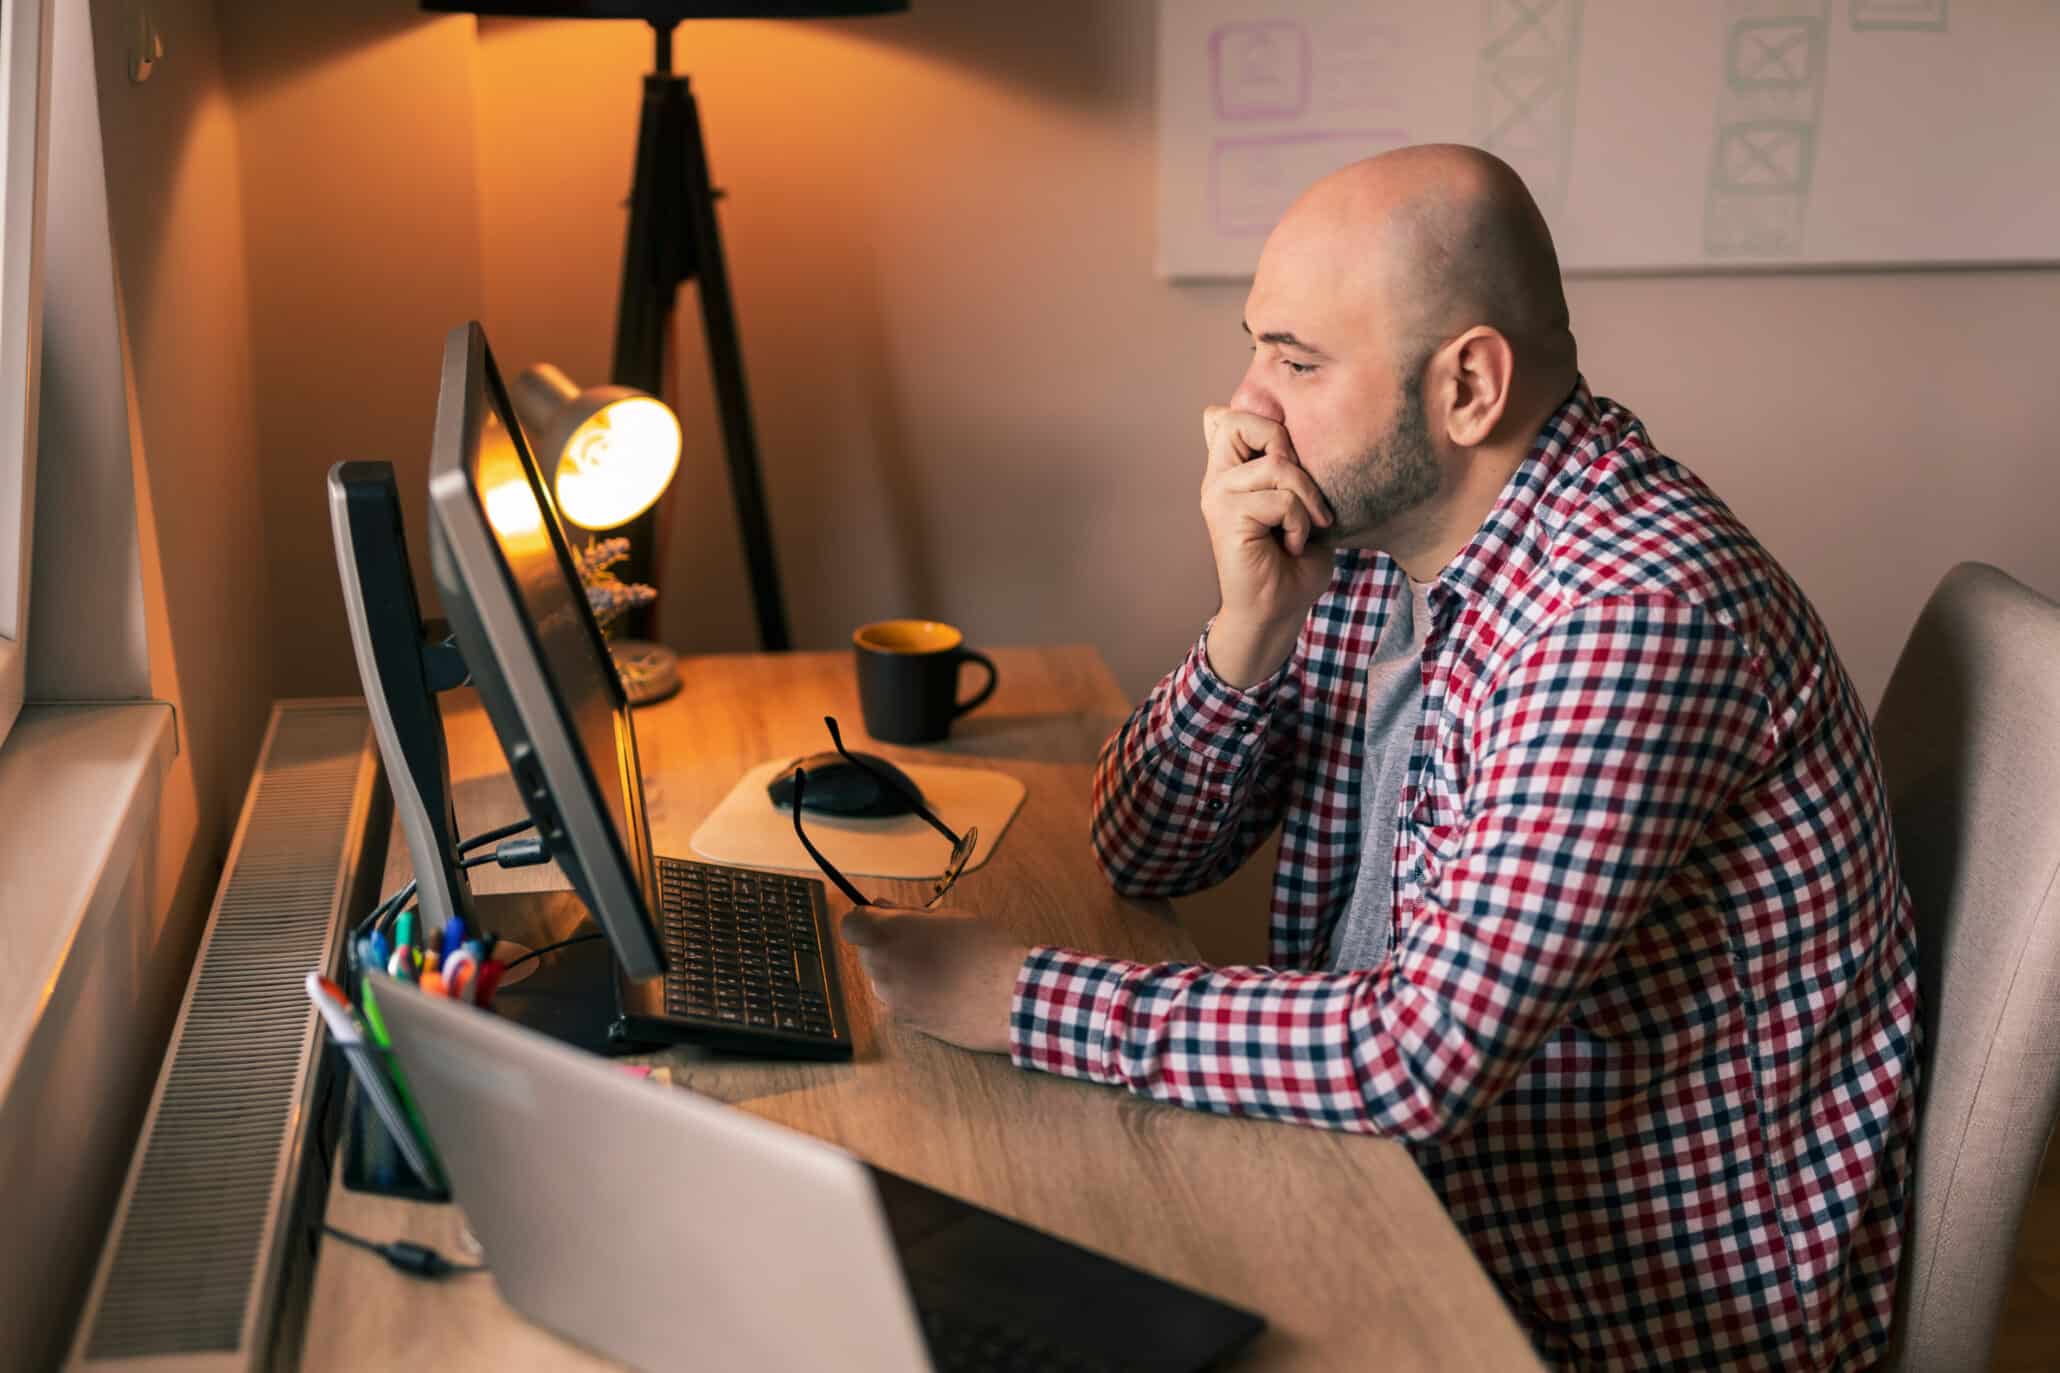 Web designer stressed out while working long hours